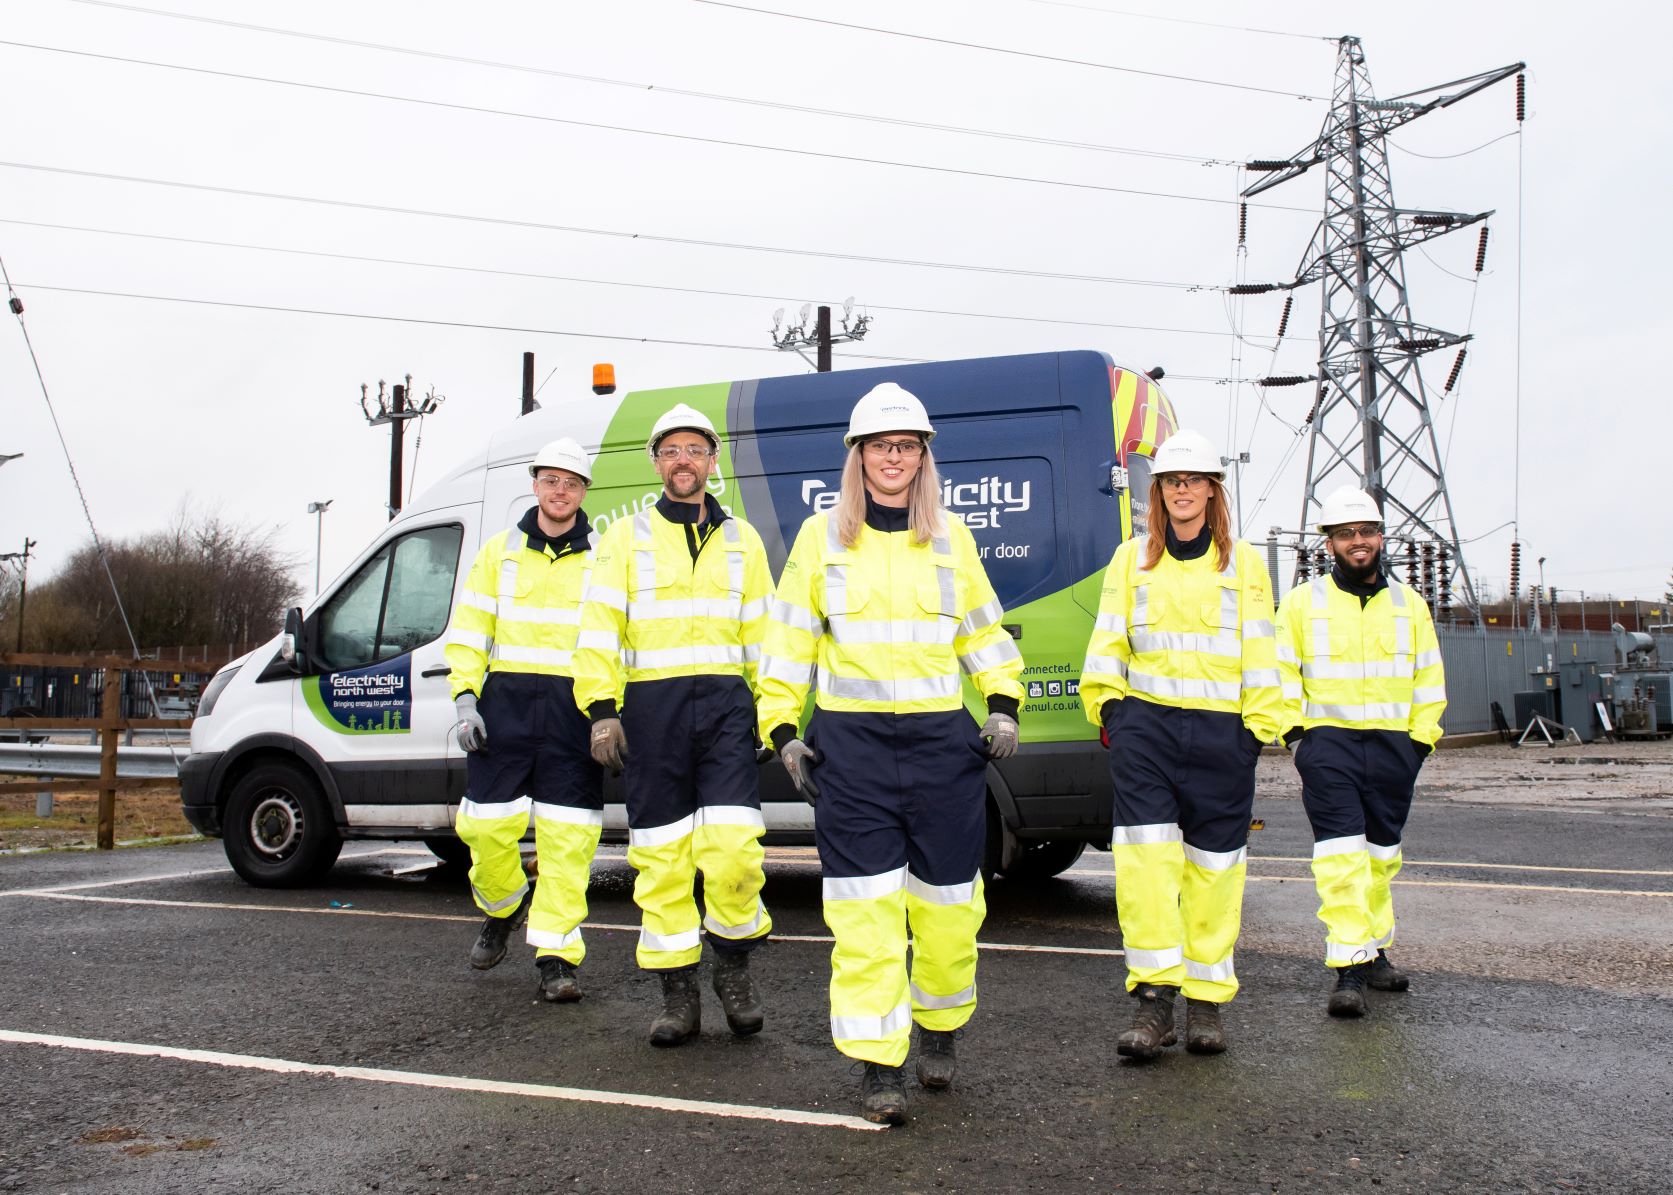 Apleona Re-Awarded Electricity North West FM Contract